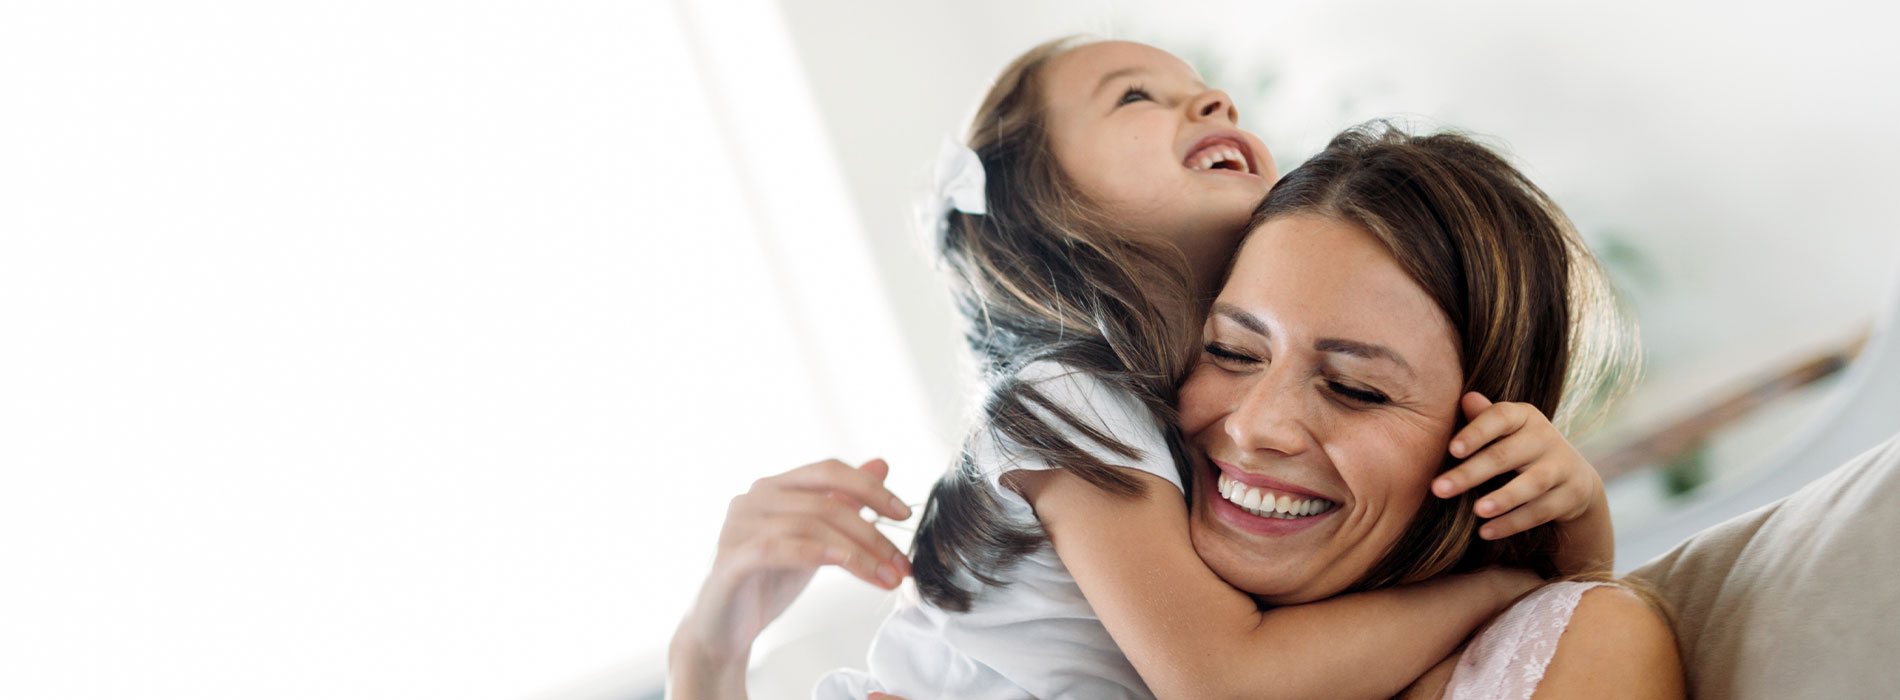 The image shows a woman embracing a child, both smiling and appearing happy.